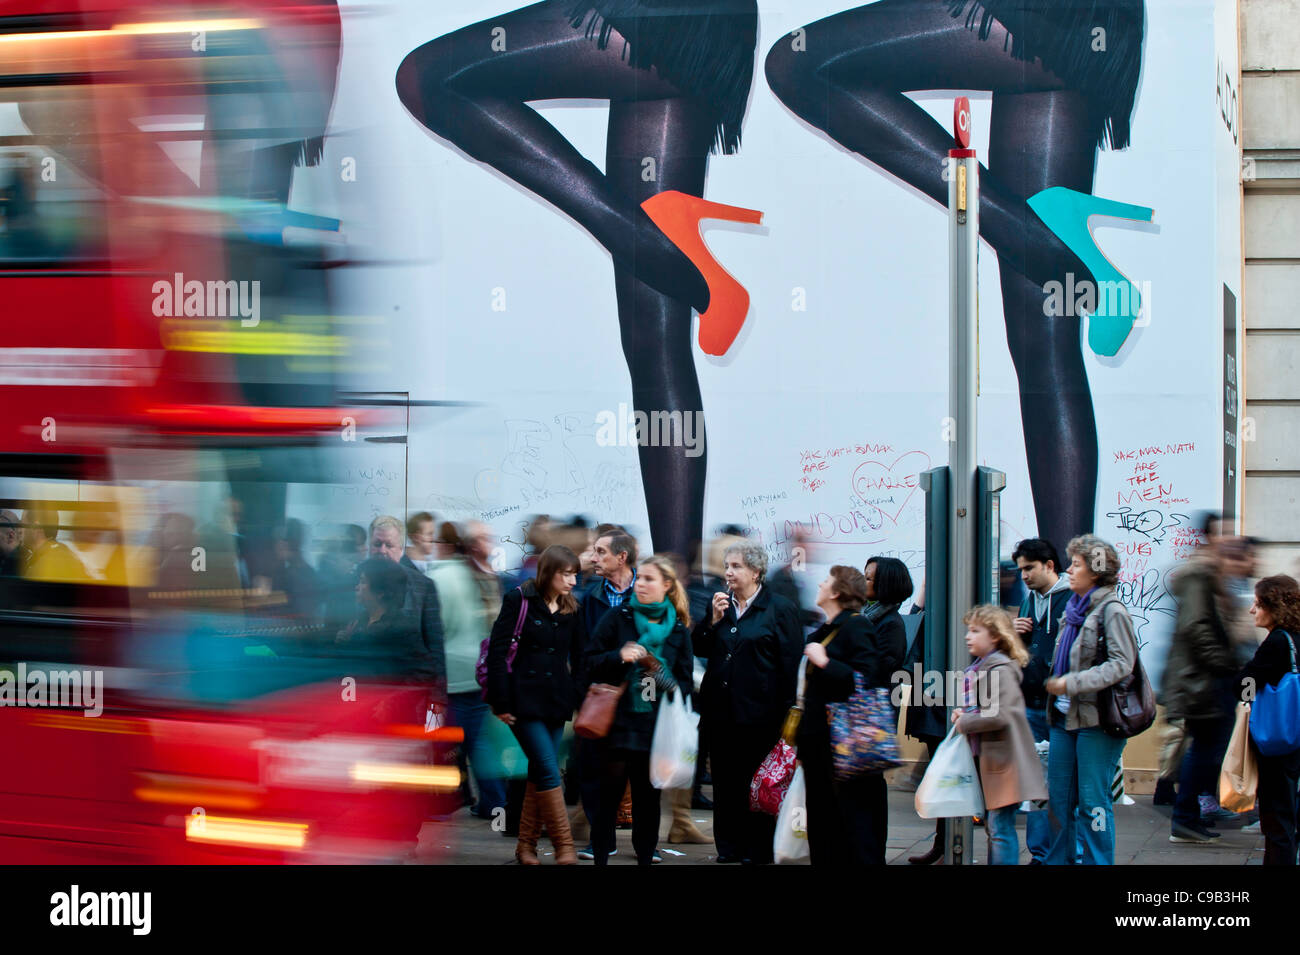 Oxford Street busy with shoppers, London, United Kingdom Stock Photo